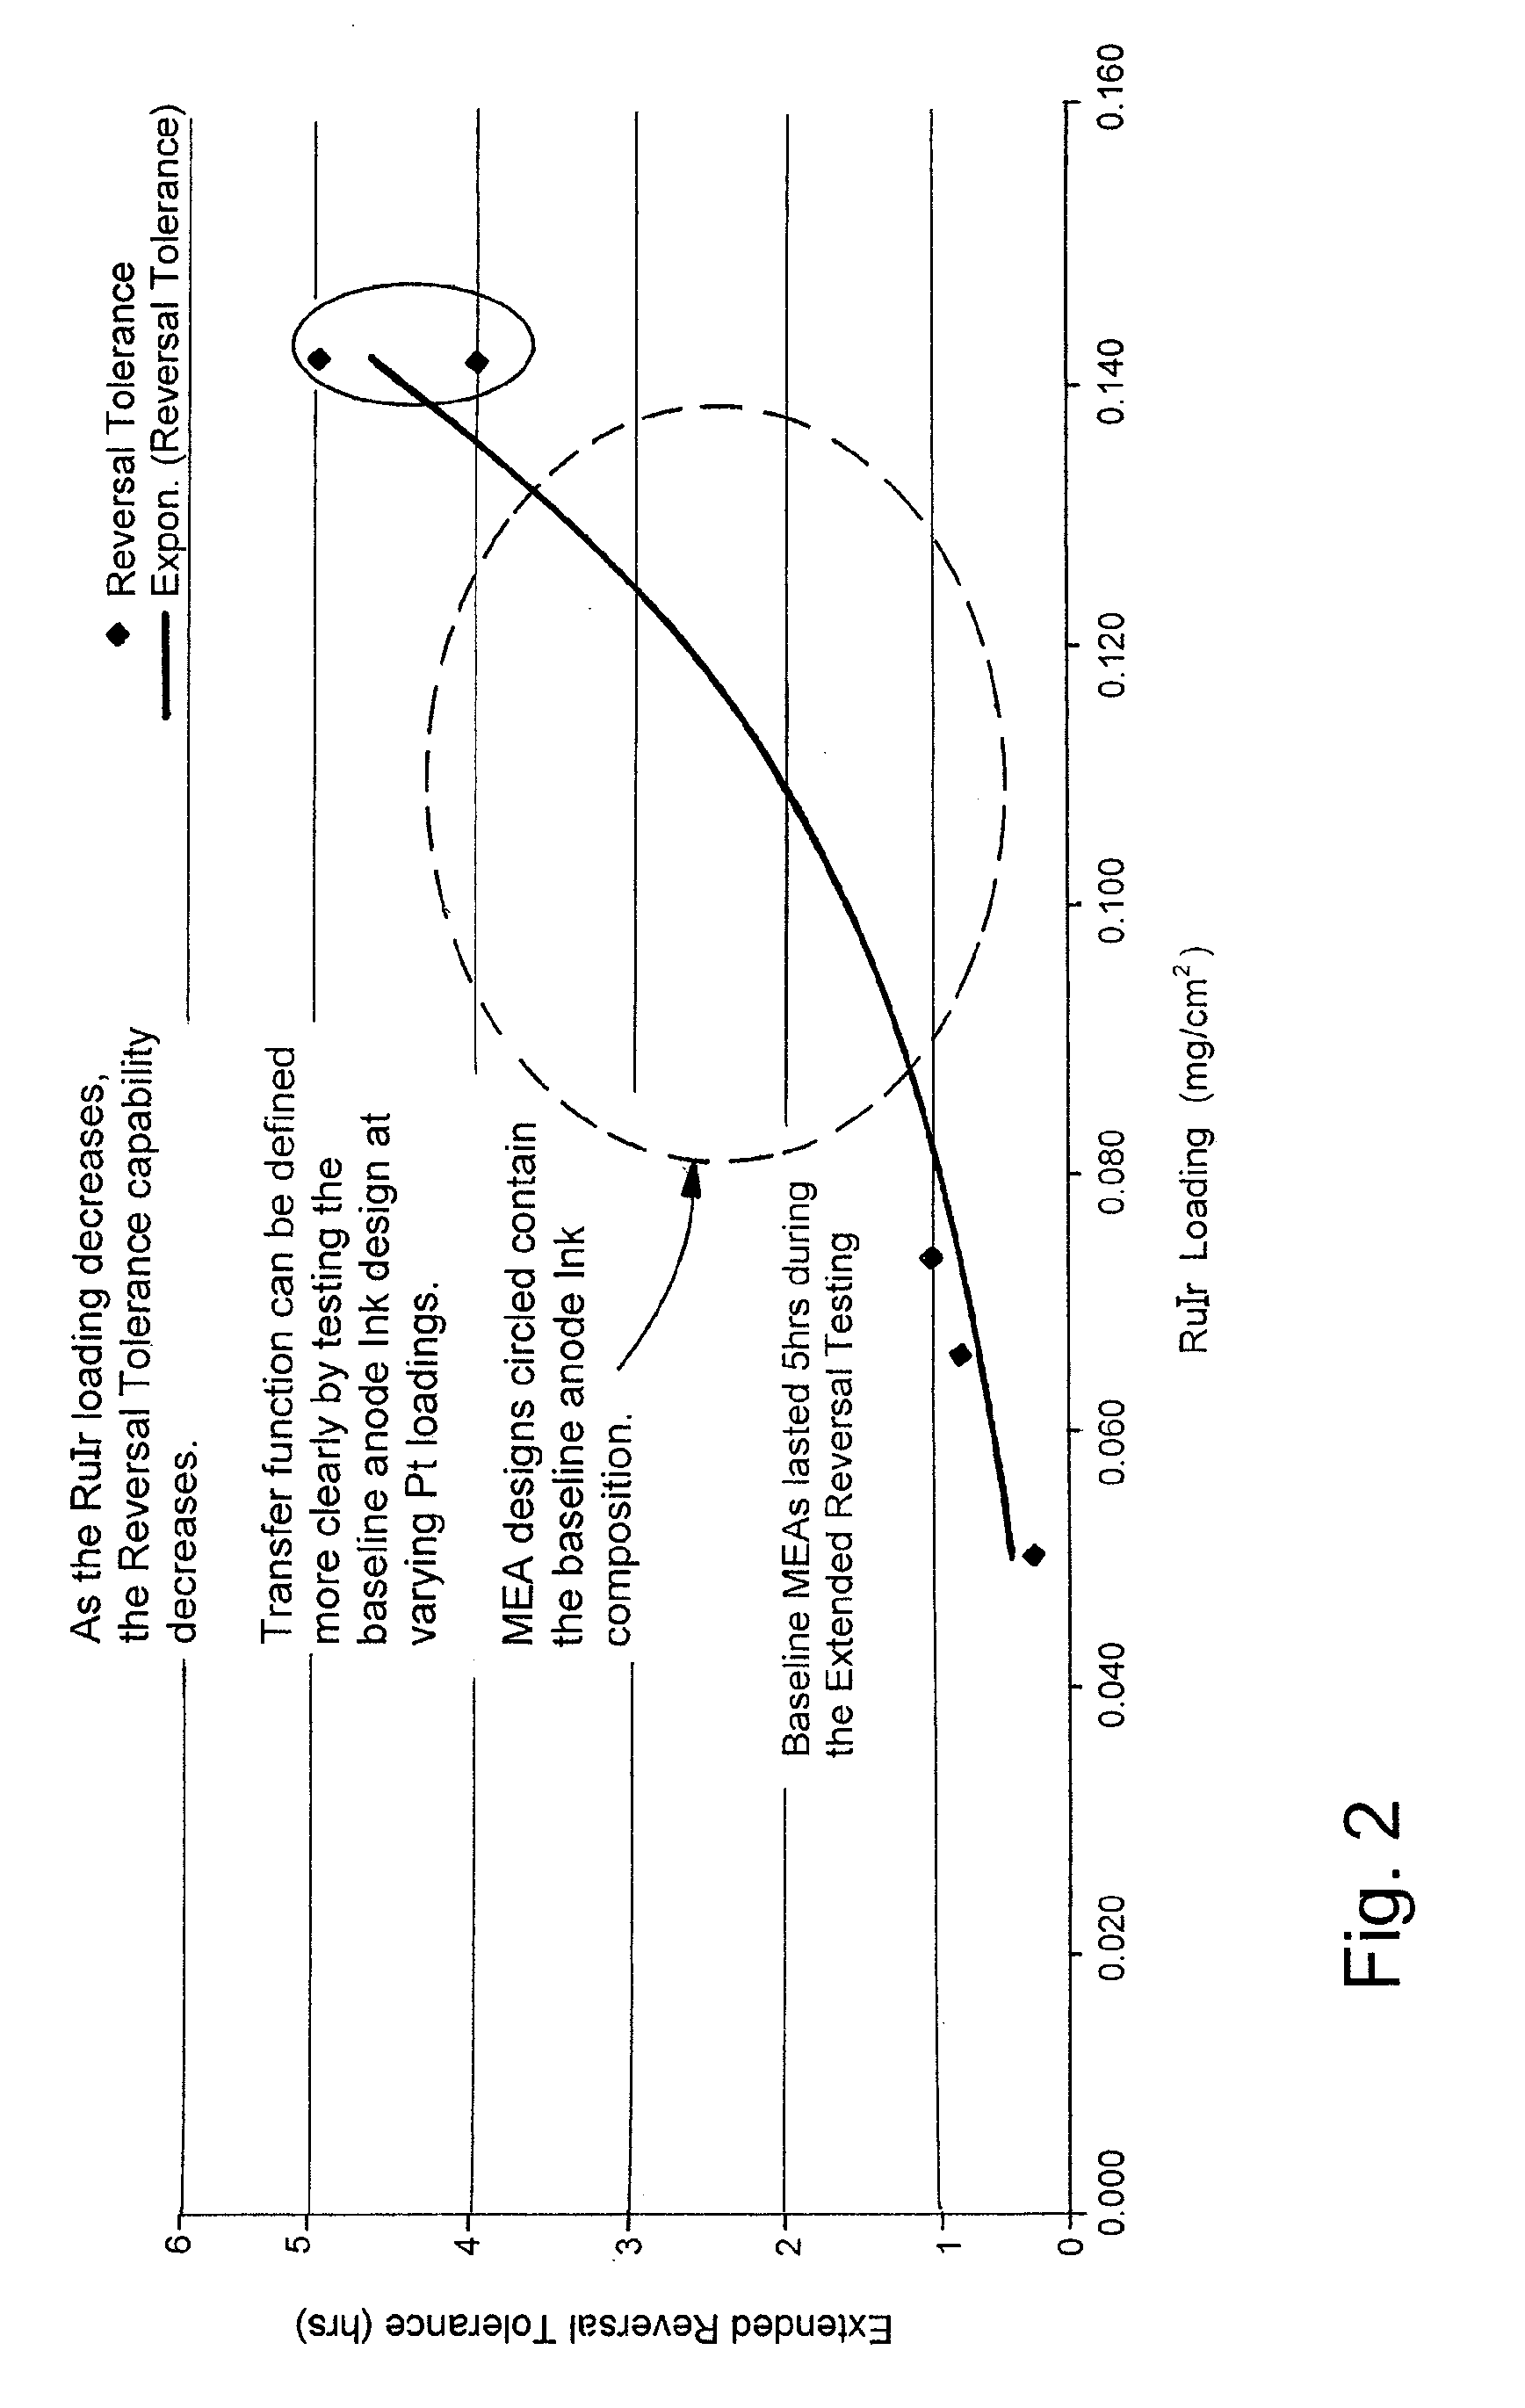 Reversal tolerant membrane electrode assembly for a fuel cell